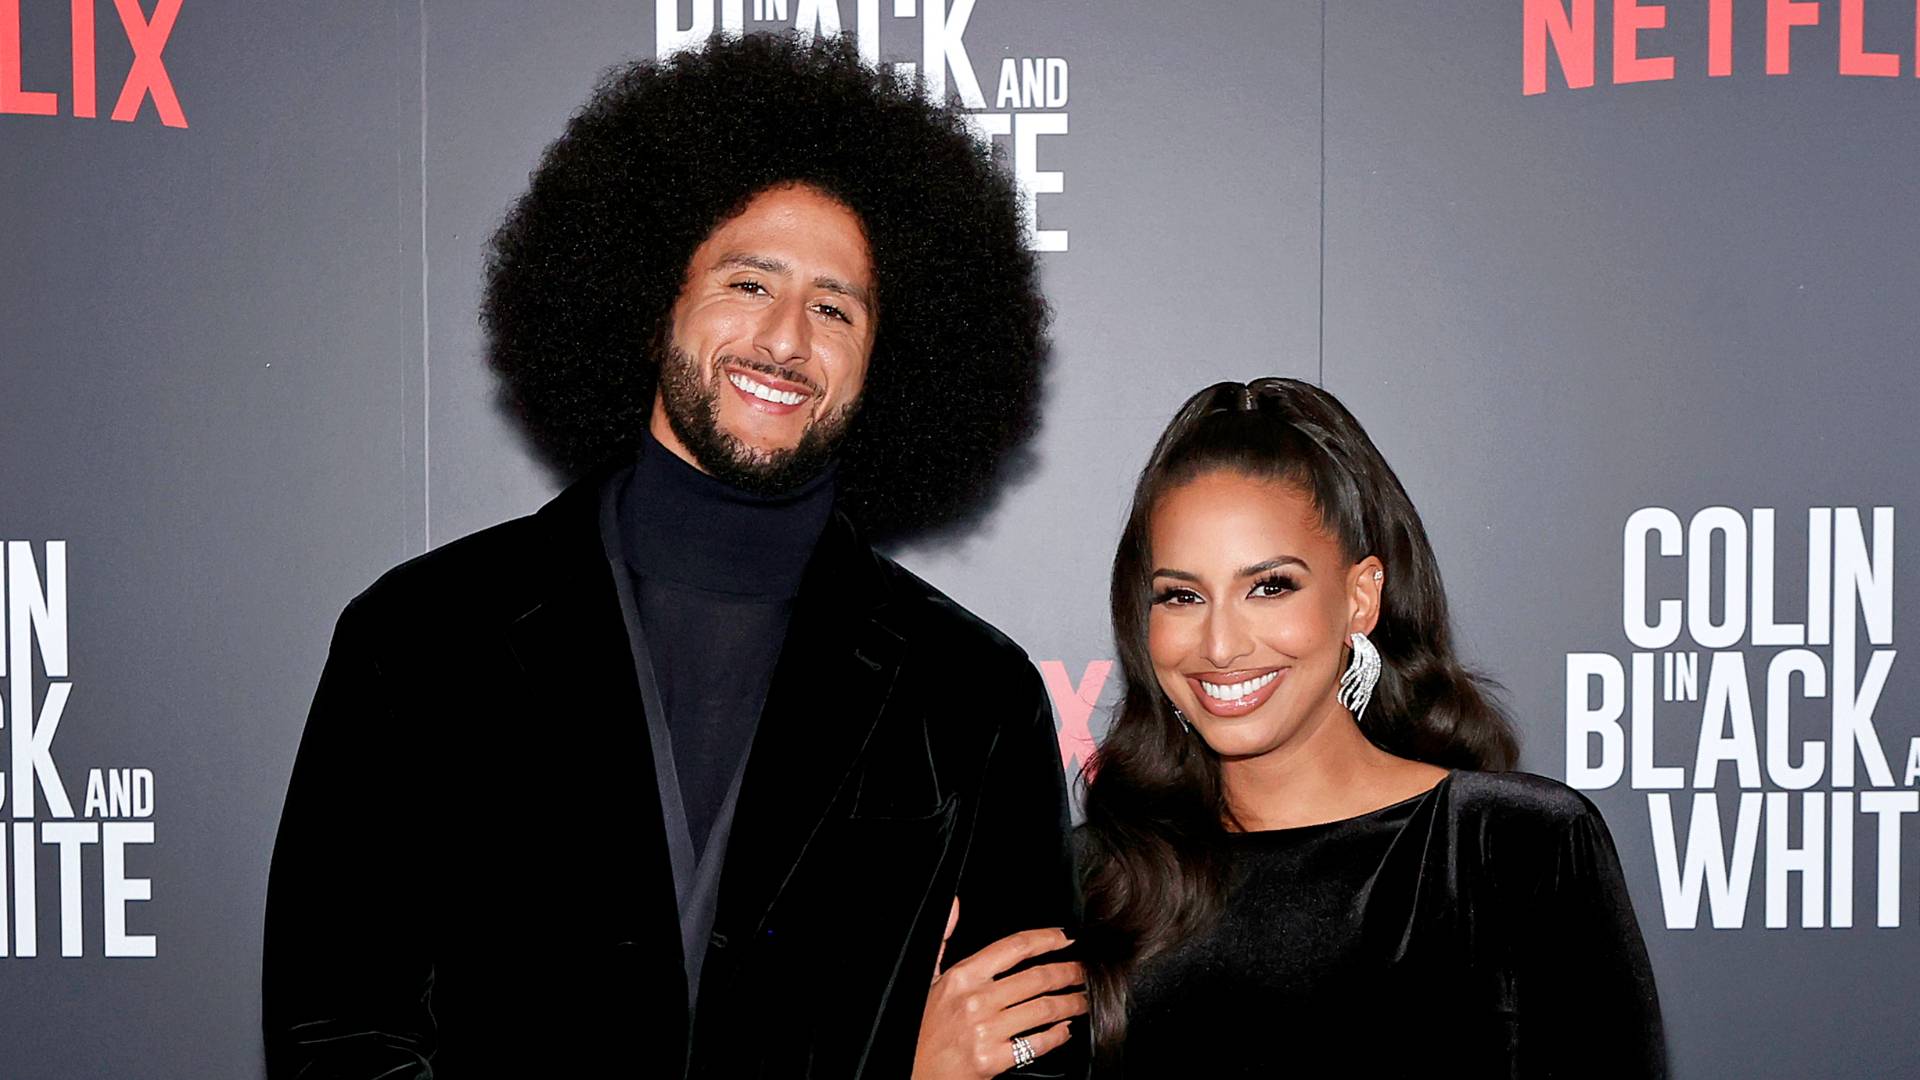 Colin Kaepernick (L) and Nessa attend the Netflix Limited Series Colin In Black And White Special Screening at The Whitby Hotel on October 26, 2021 in New York City. 